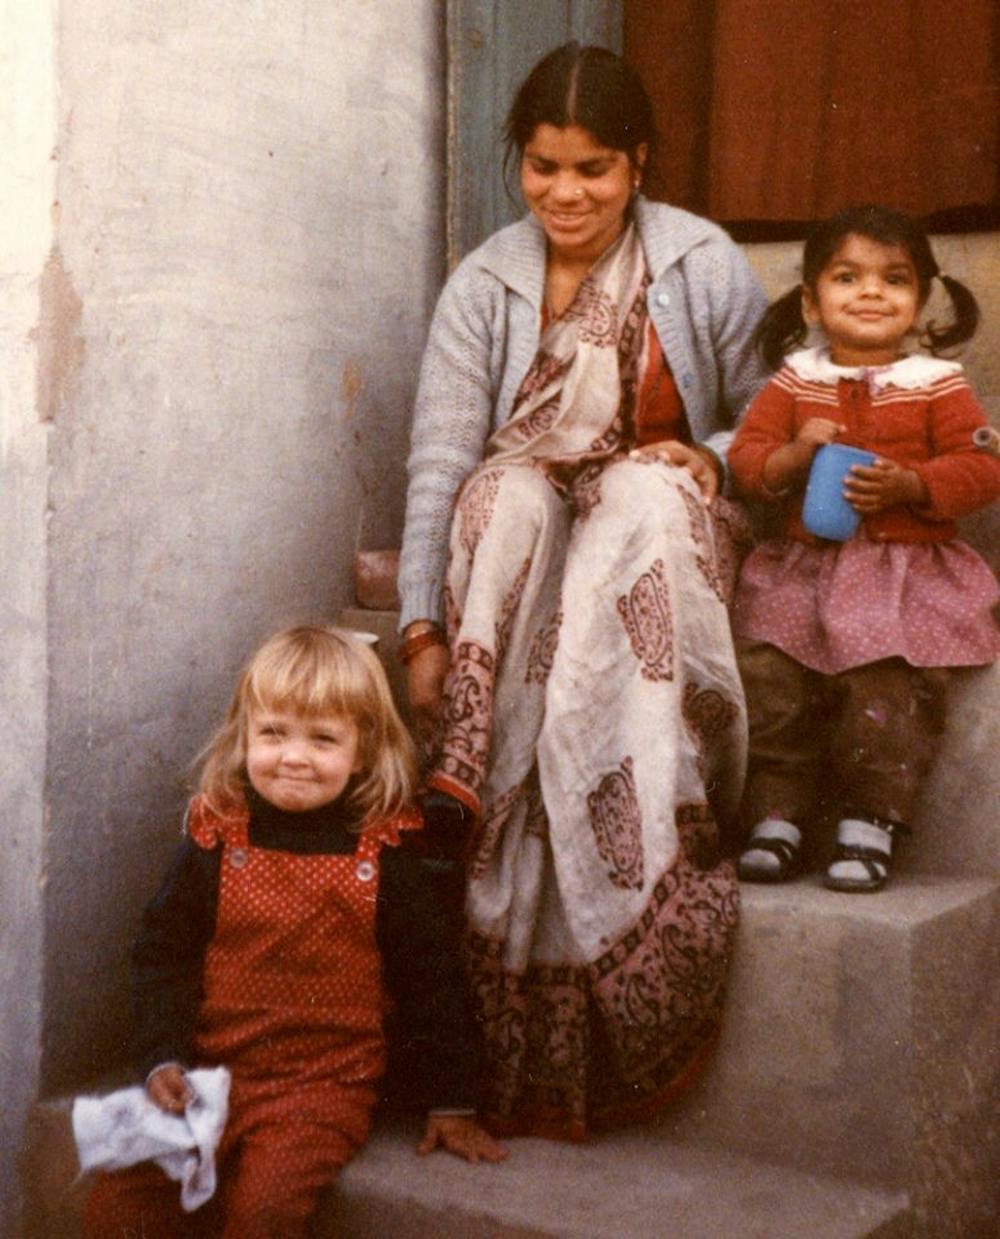 Shanti and her daughter Sumitera, then Jodi. She was about three years old and was living in India at the time. Shanti and Sumitera are the mother and daughter of a family that lived with Jodi and her family. 